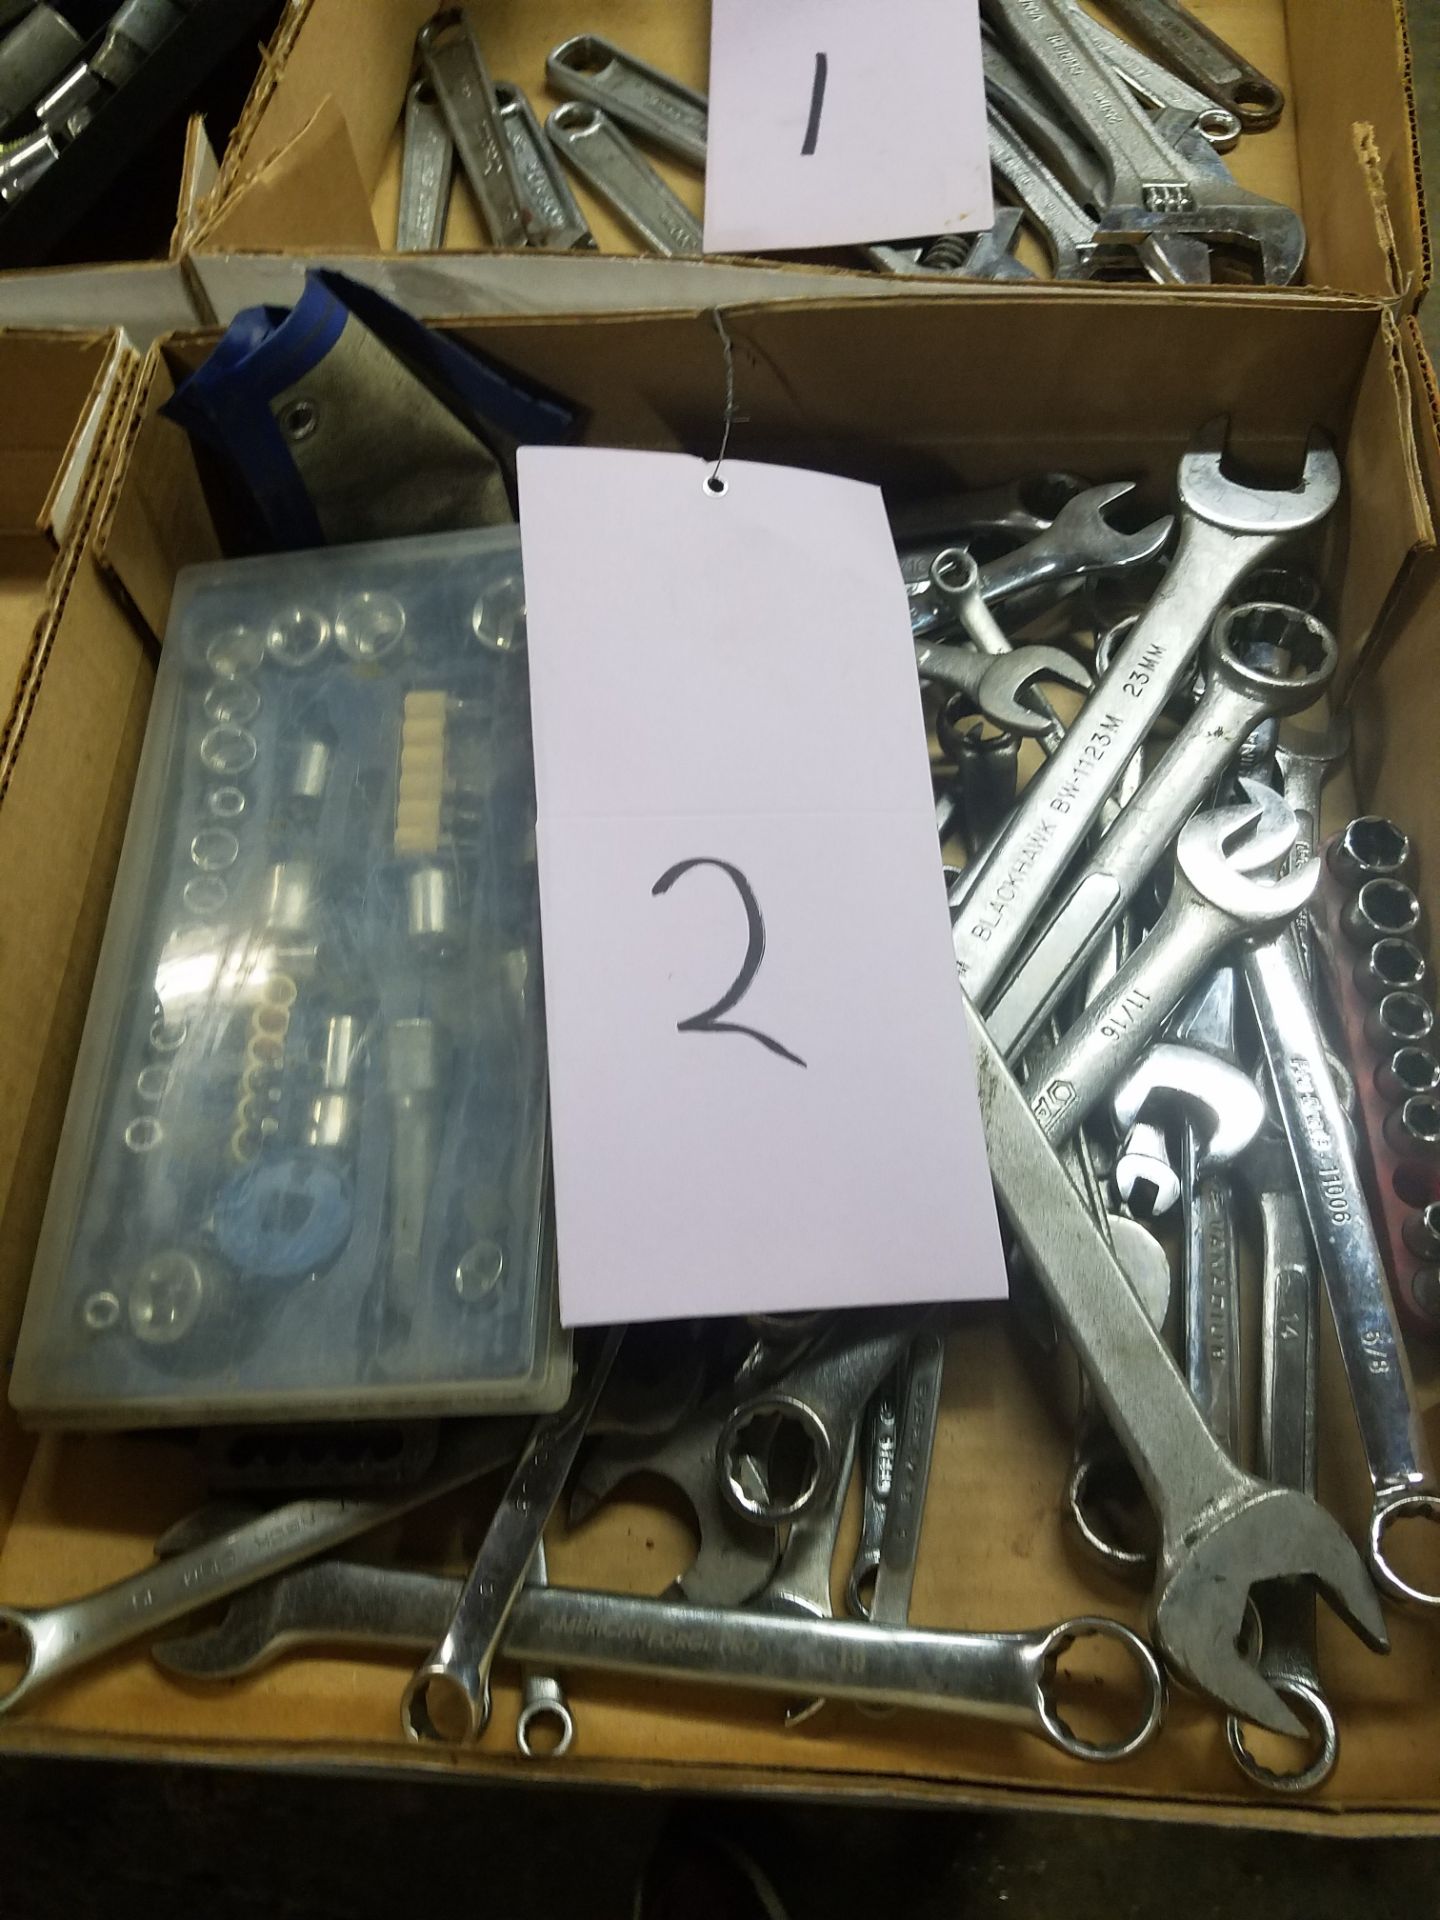 WRENCHES & SOCKETS